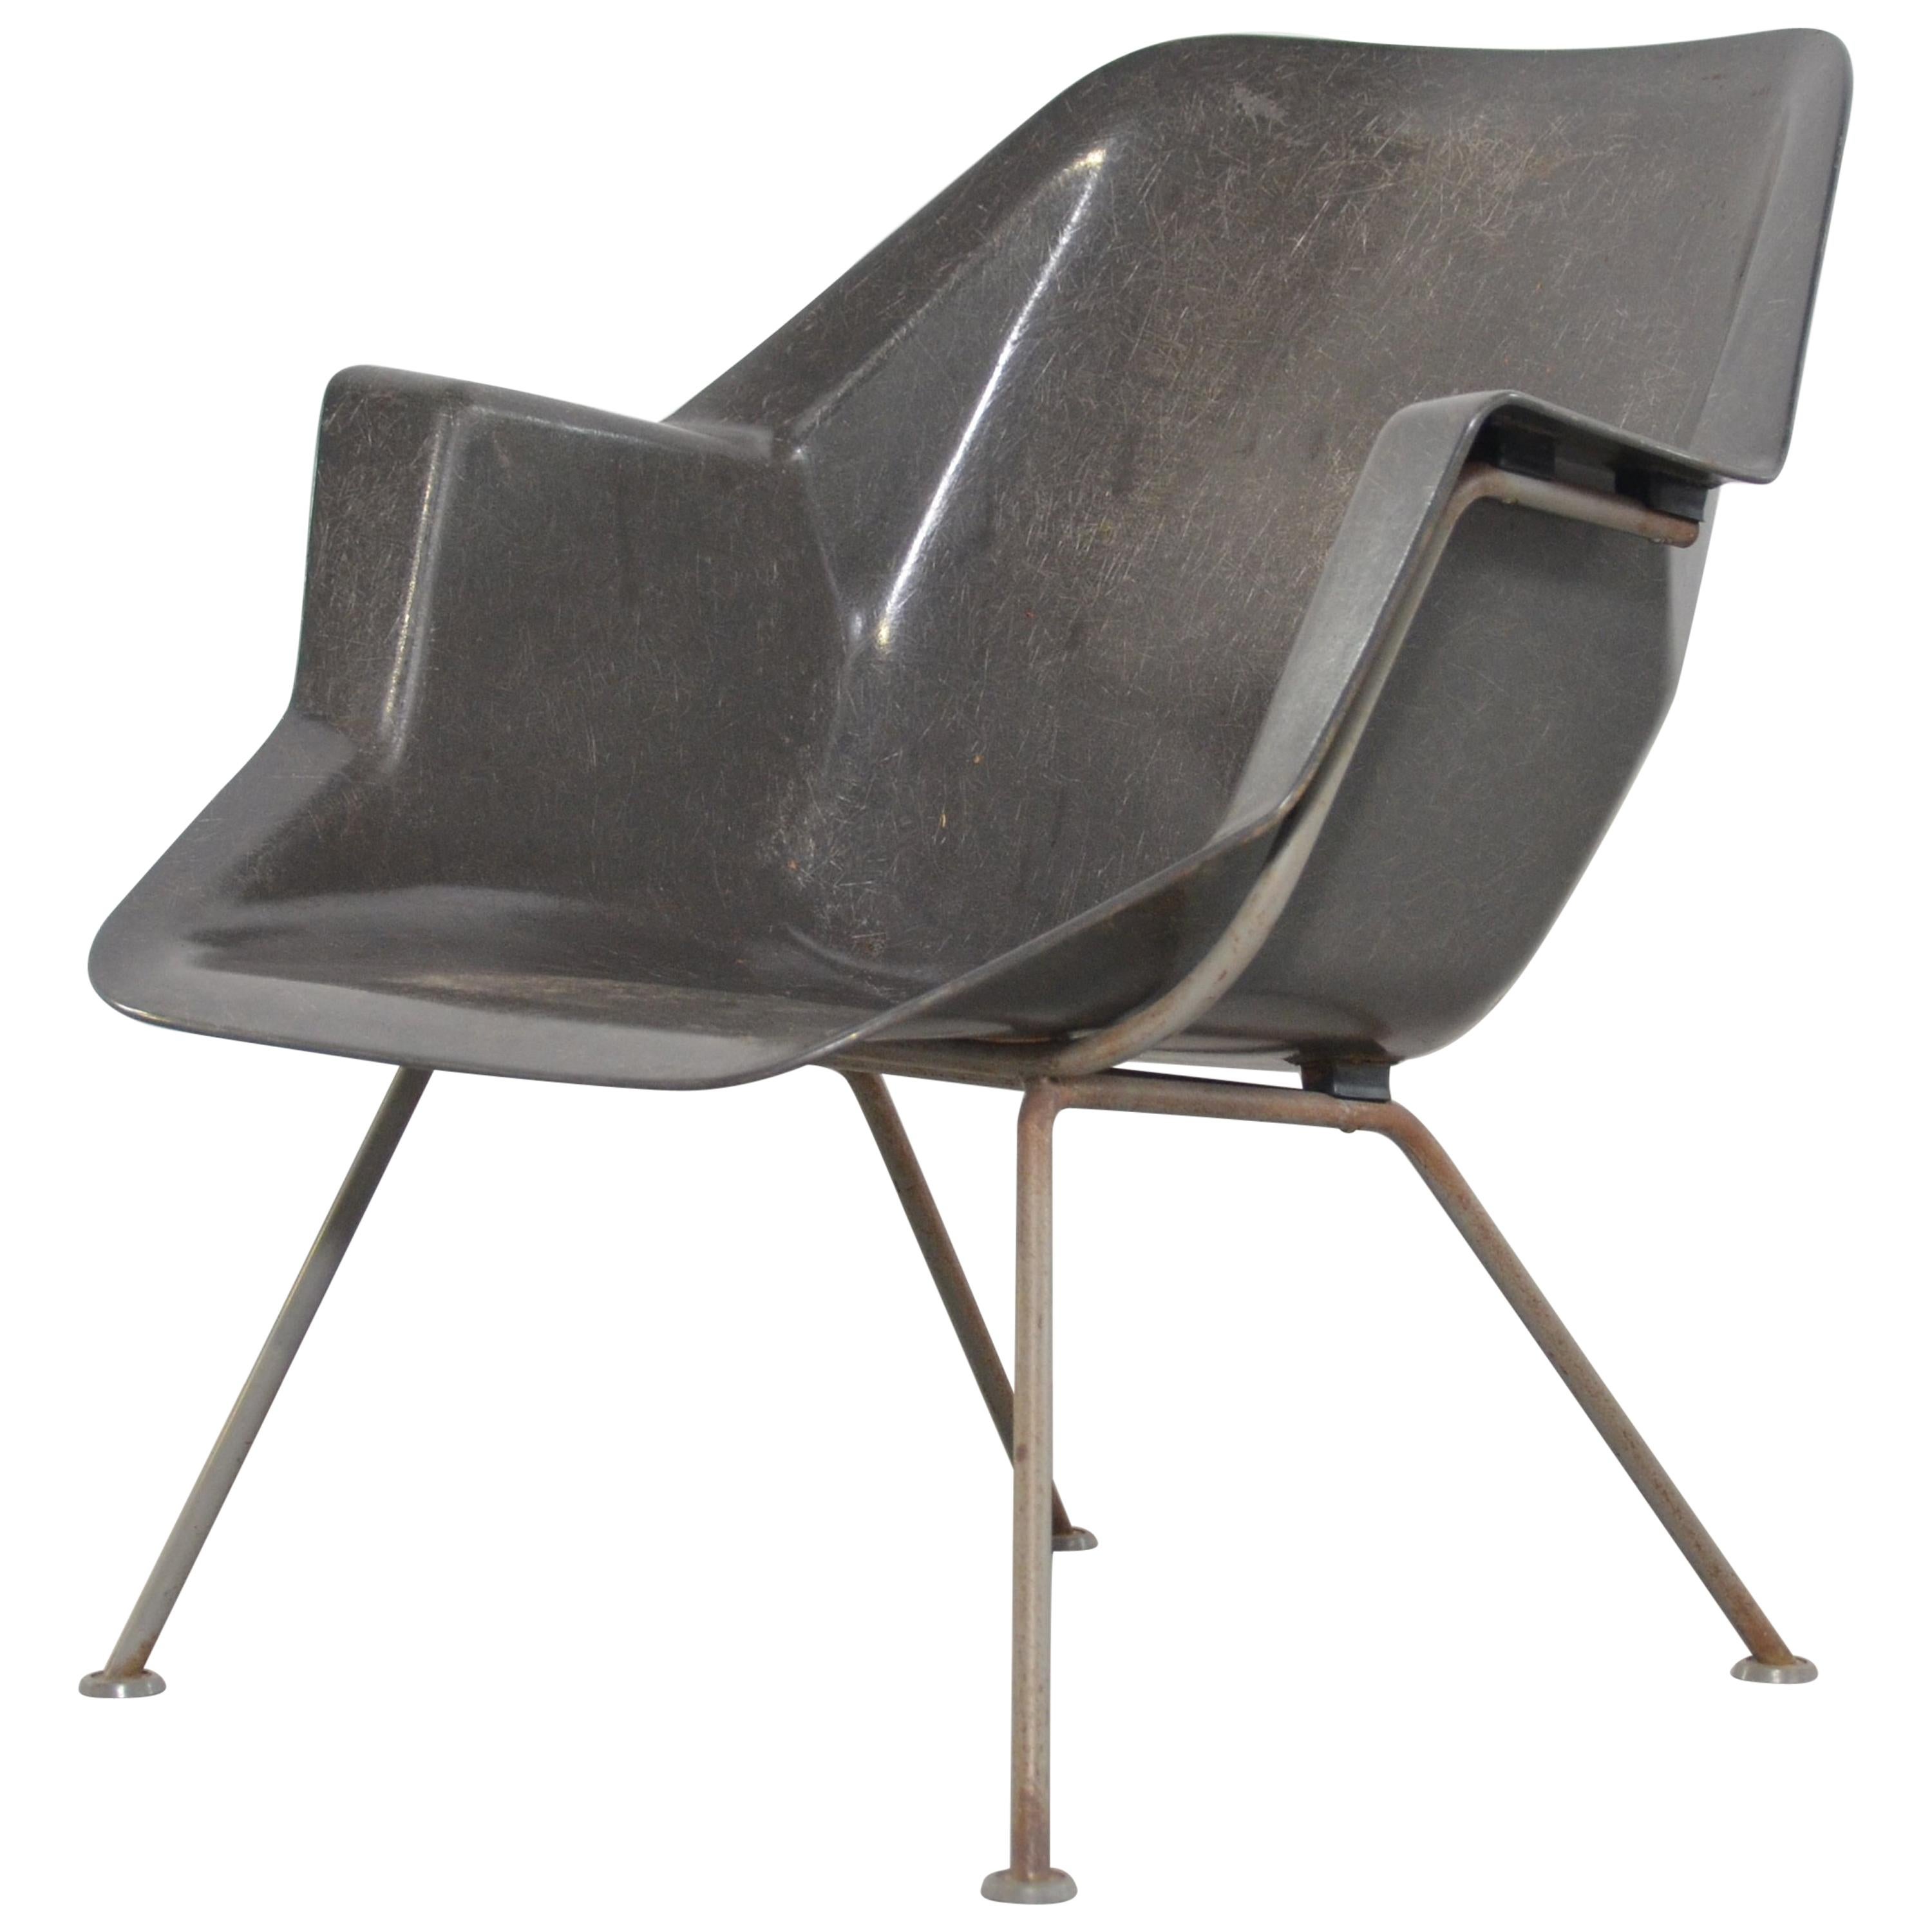 Wim Rietveld Polyester Lounge Chair 416 for Gispen, Netherlands 